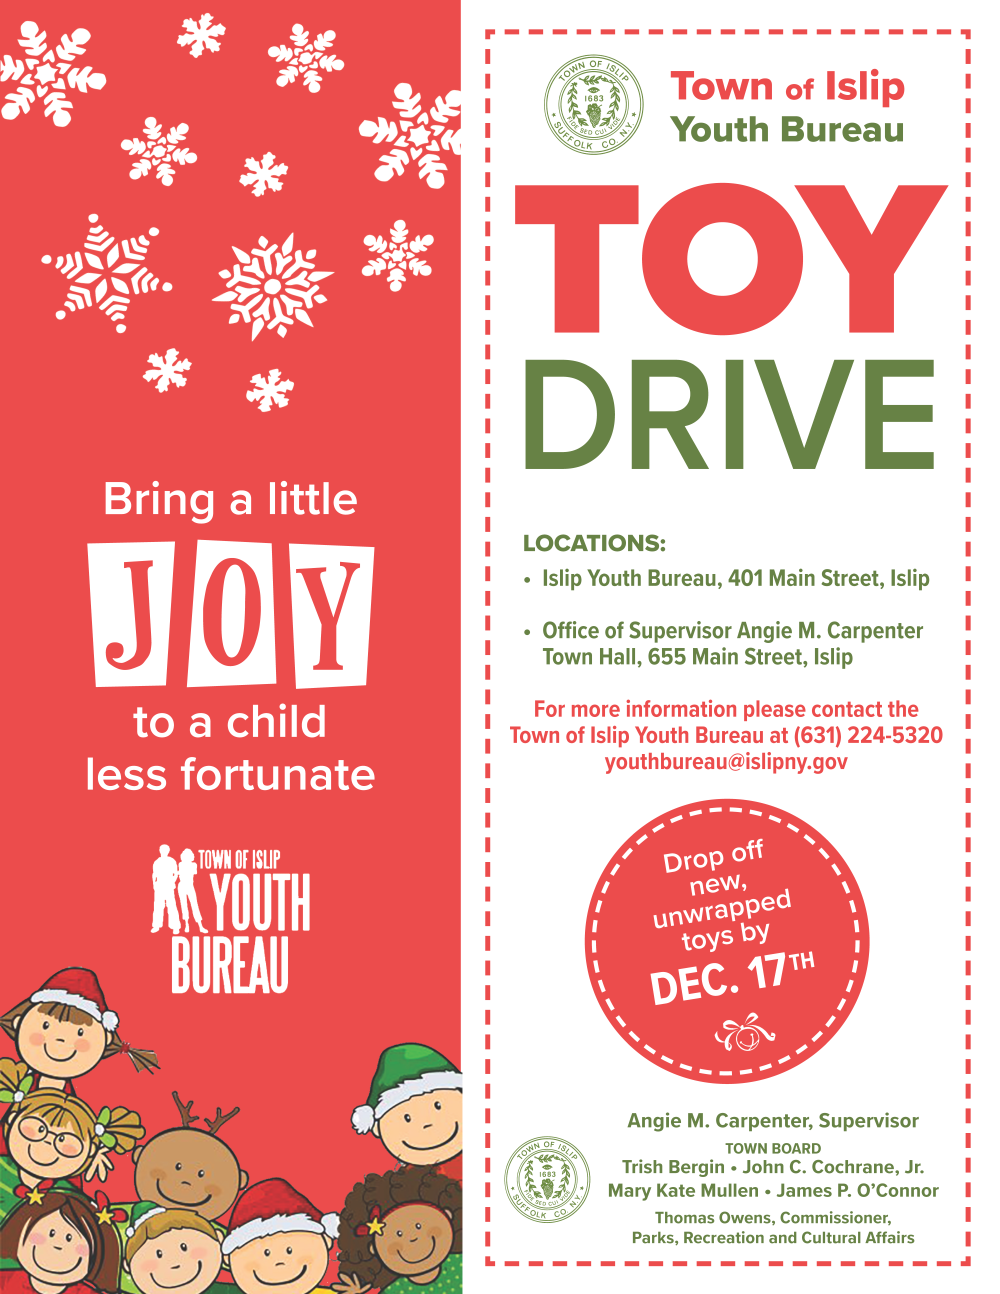 Toy Drive drop off by Dec. 17th, details in article